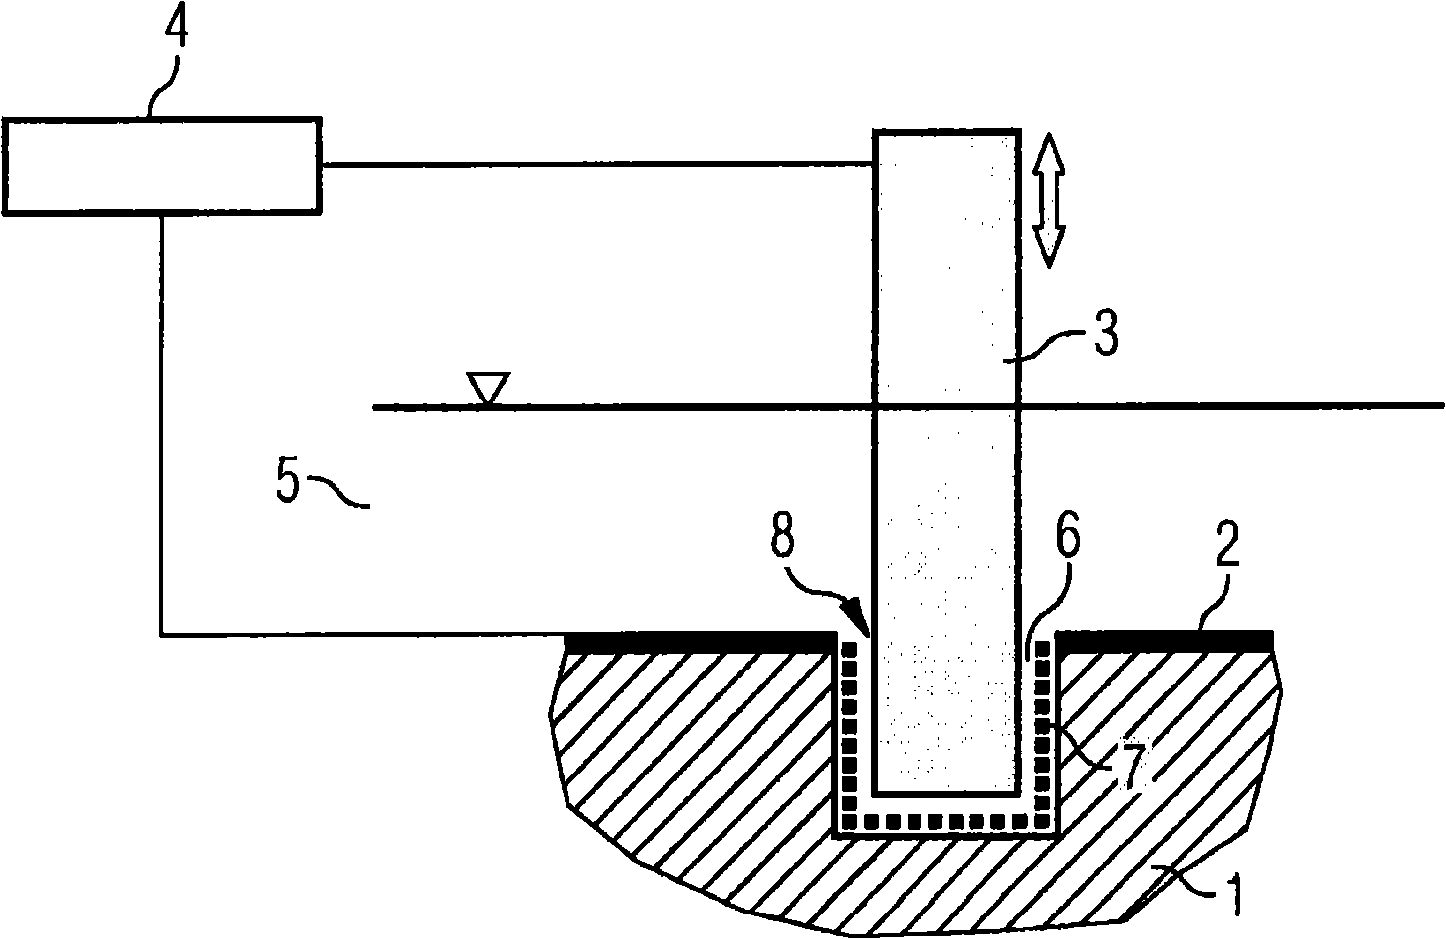 Dielectric fluid for electric discharge machining a non electrically conductive material